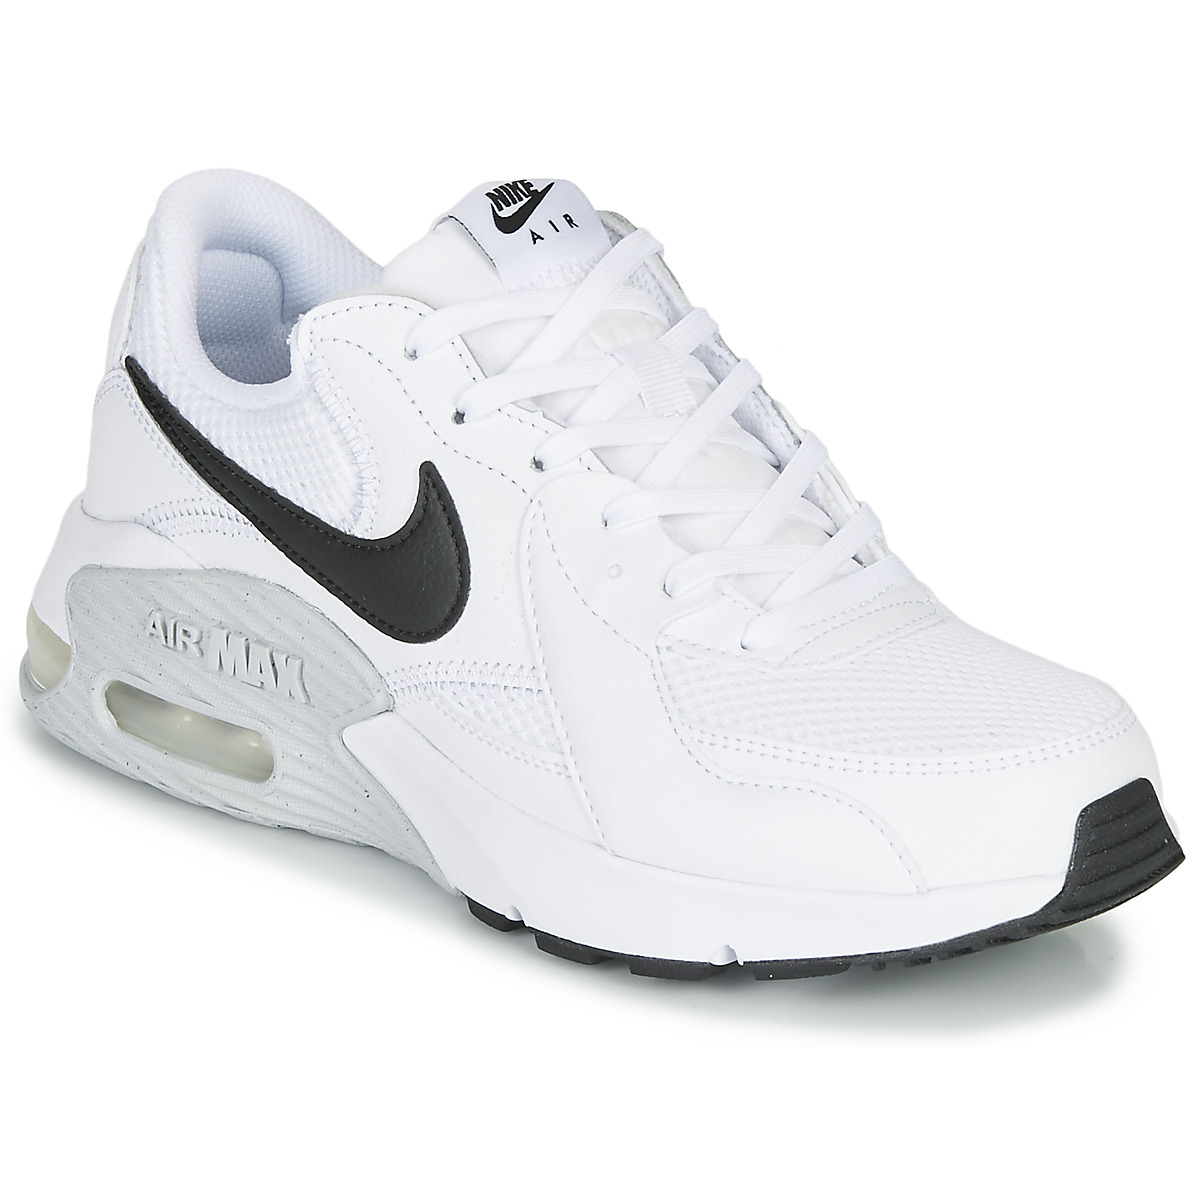 Nike and AIR MAX EXCEE 17891003 1200 A